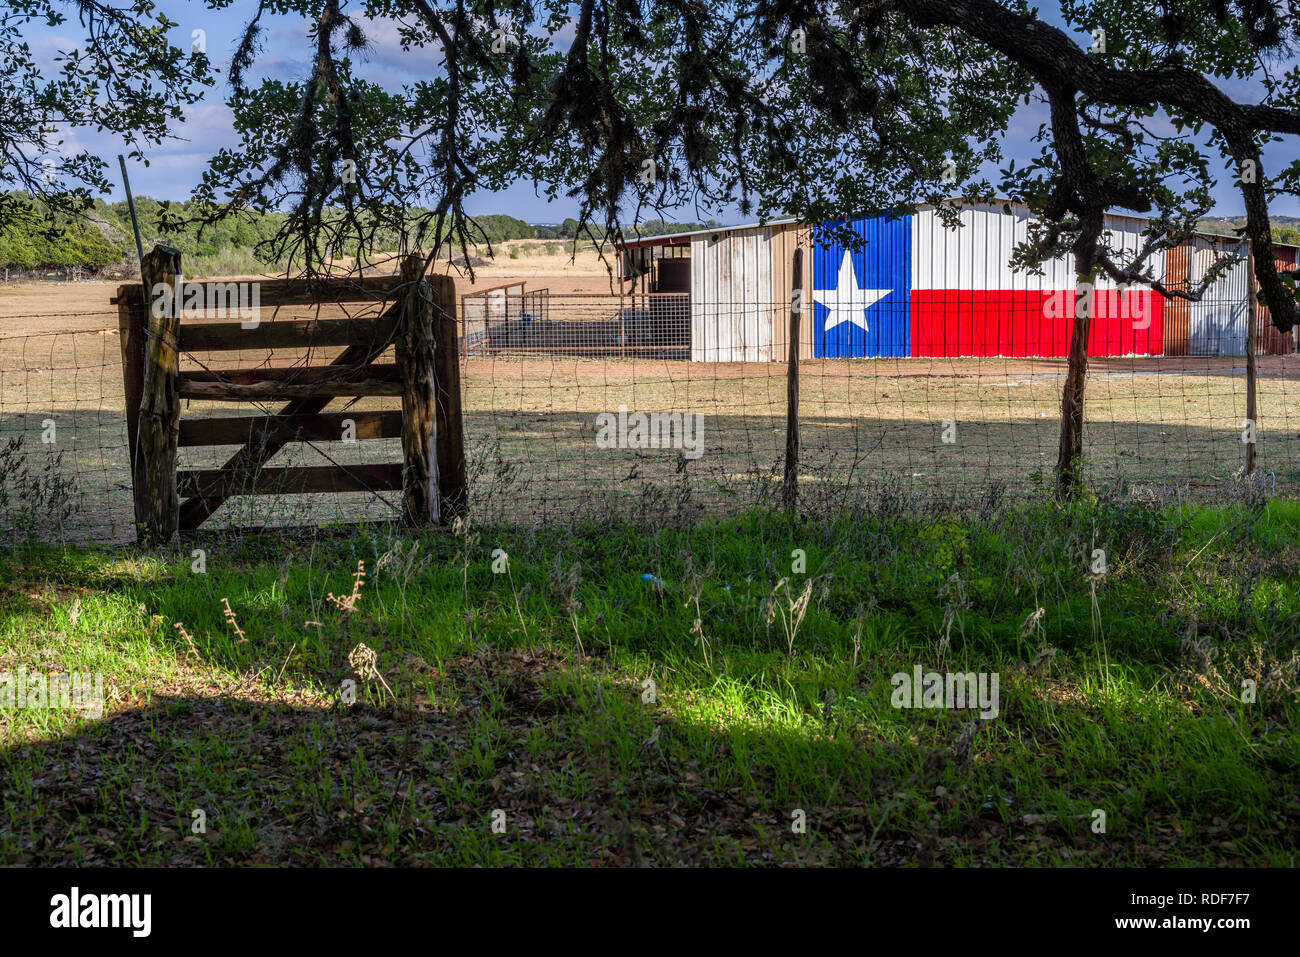 Texas Lone Star flag painted on a farm utility shed with fenced chickens. Stock Photo